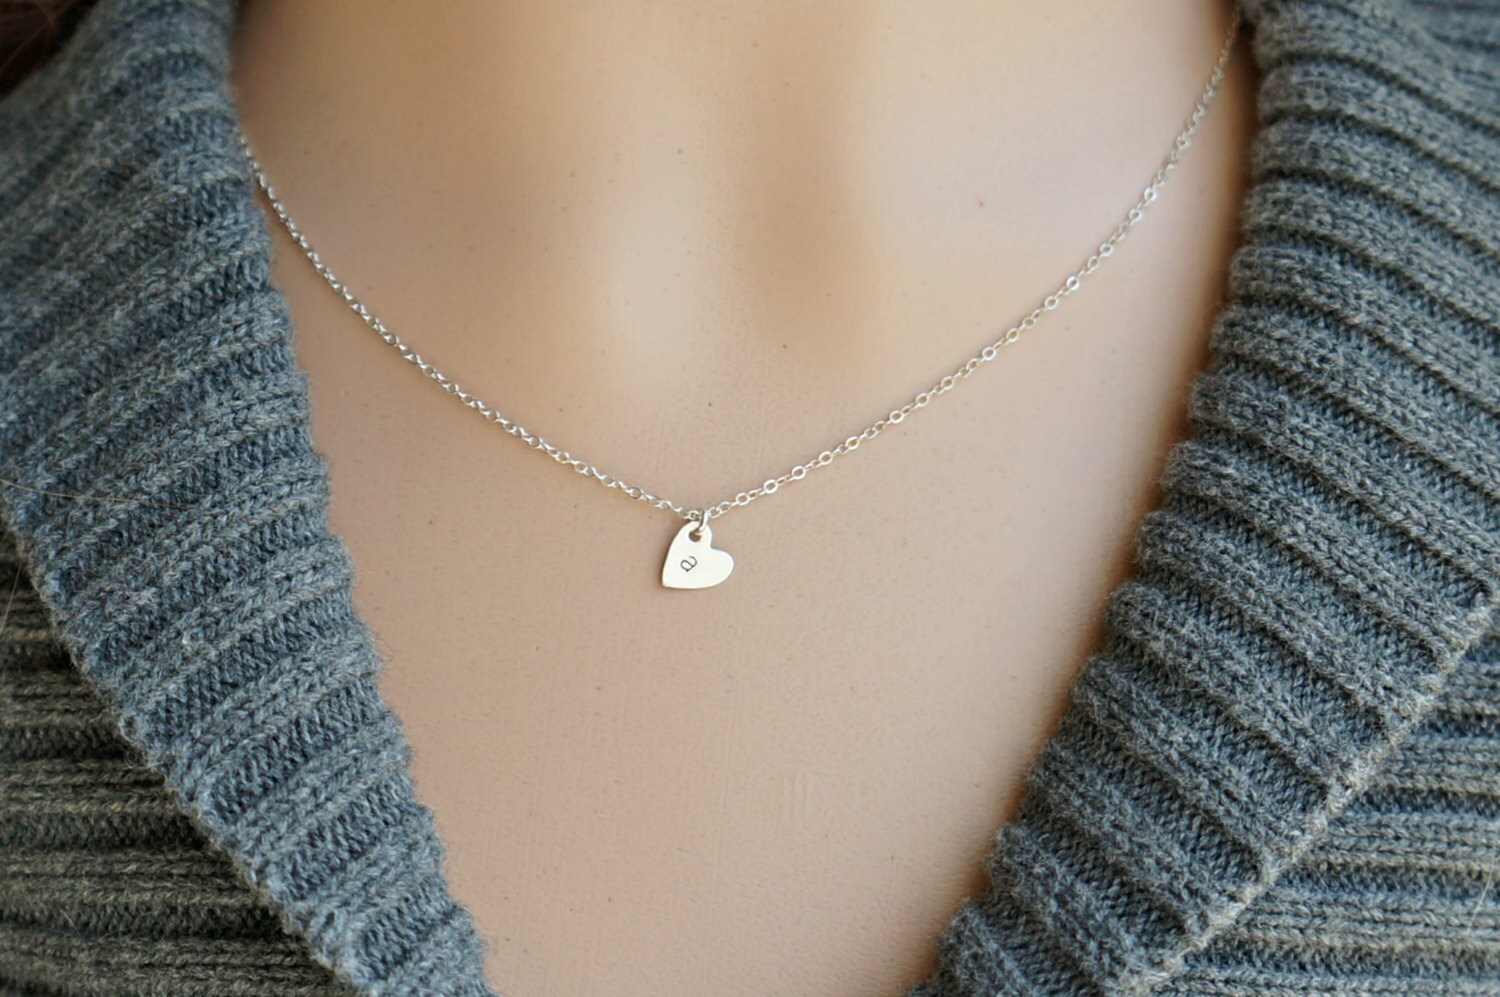 B and Heart Necklace - Etsy